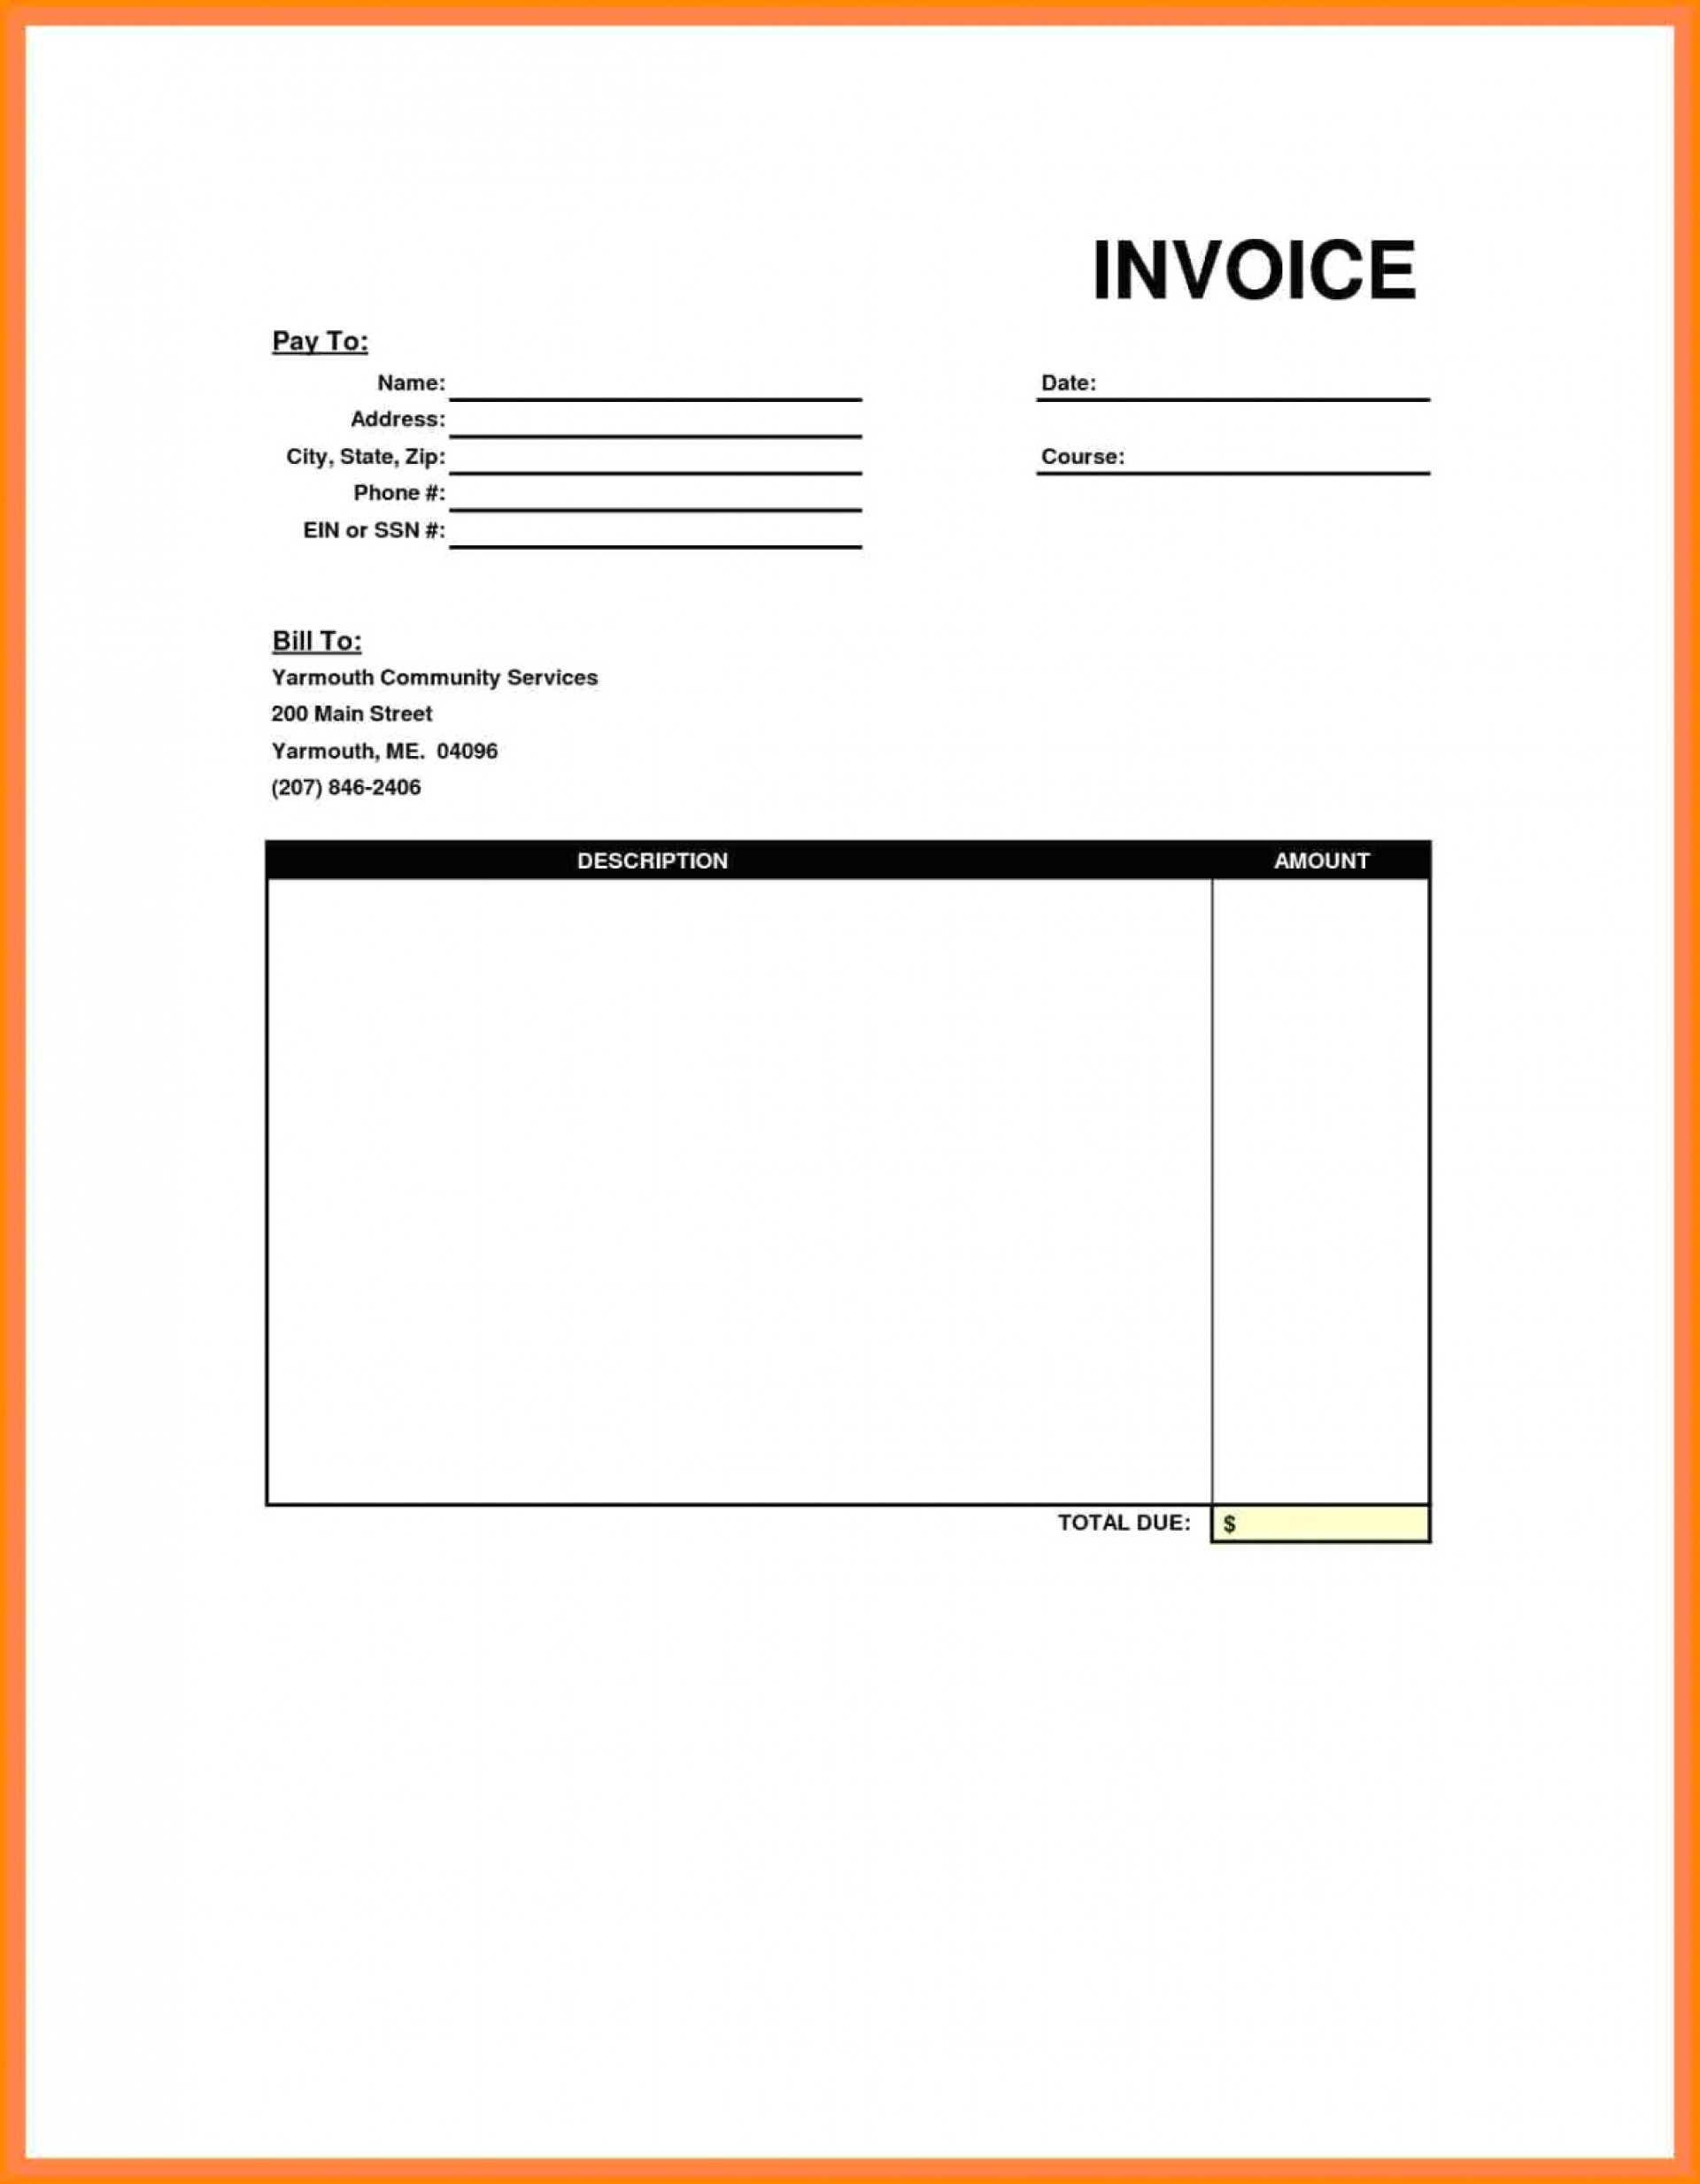 015 template ideas simple cash receipt word doc invoice blank bill invoice images